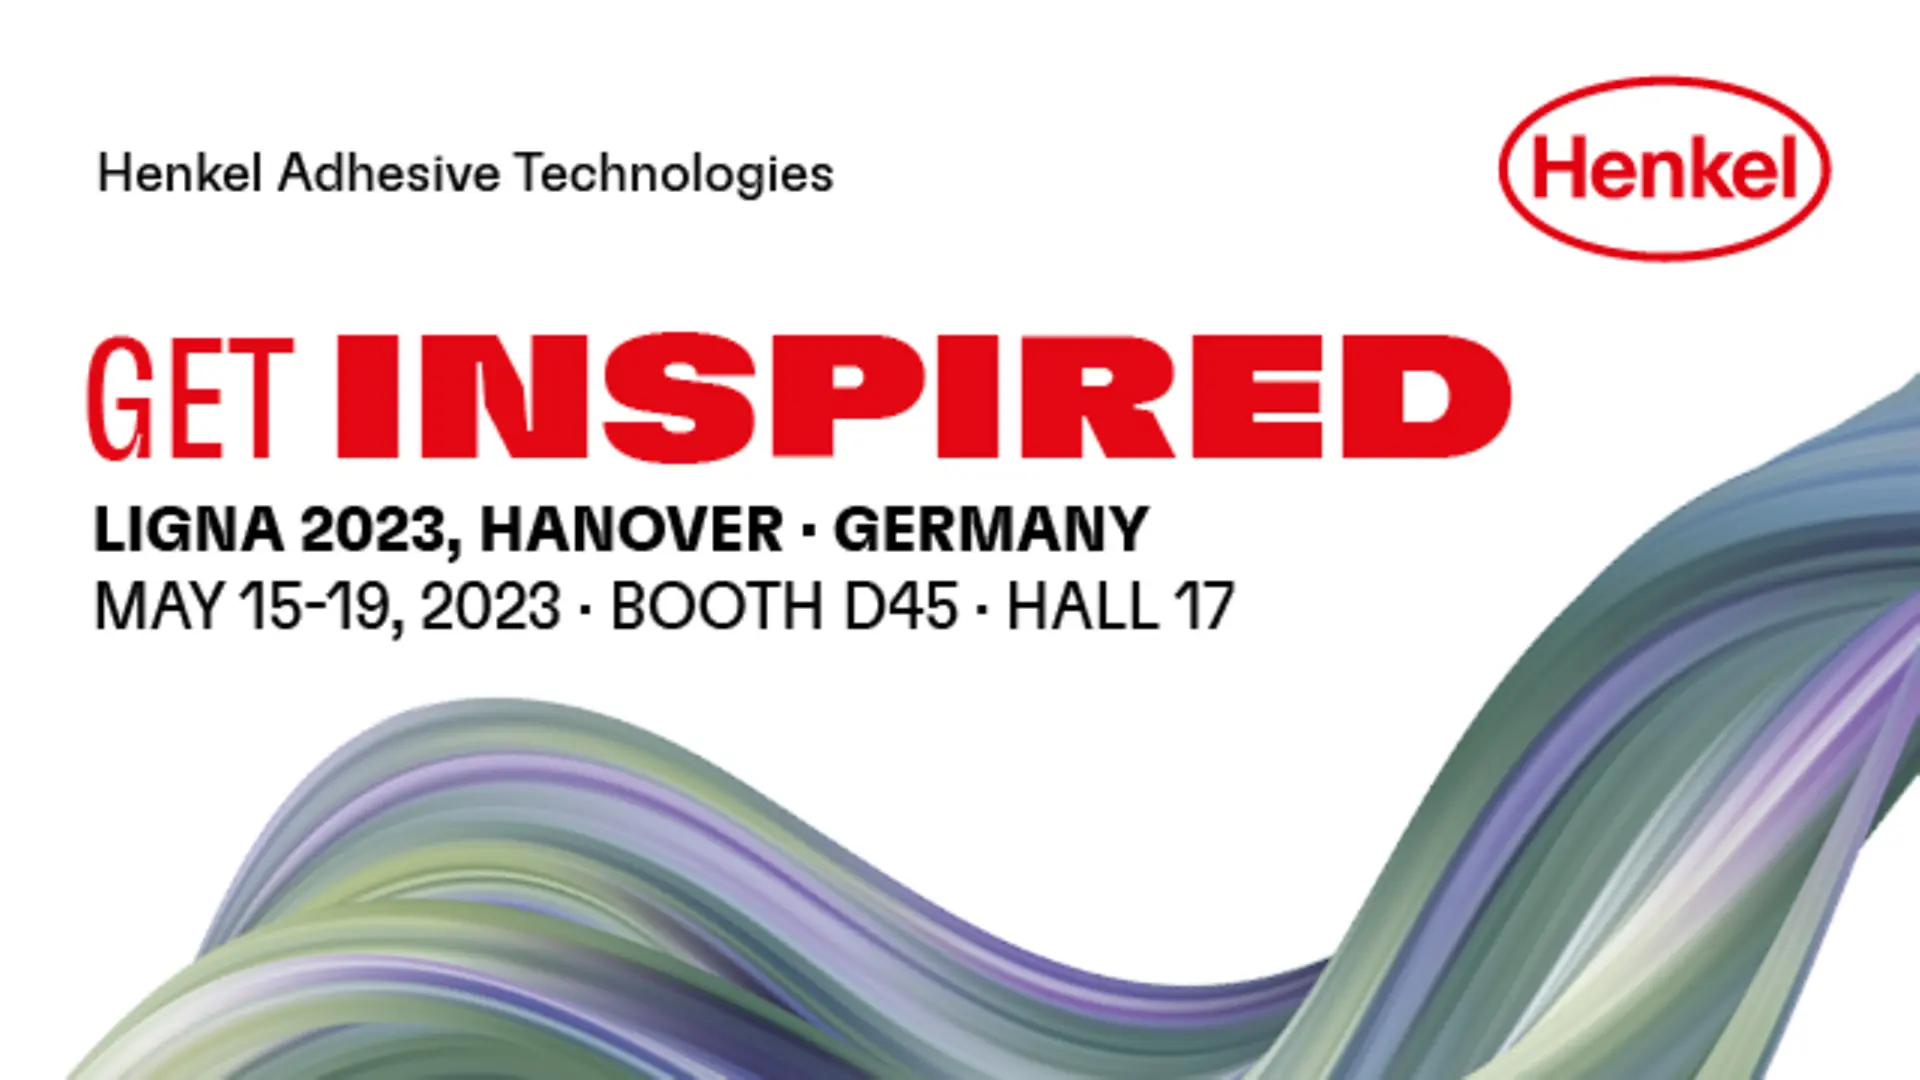 
With the theme “Get Inspired”, Henkel aims to excite visitors at LIGNA through a comprehensive portfolio of innovative and sustainable adhesives, processes, and digital tools.